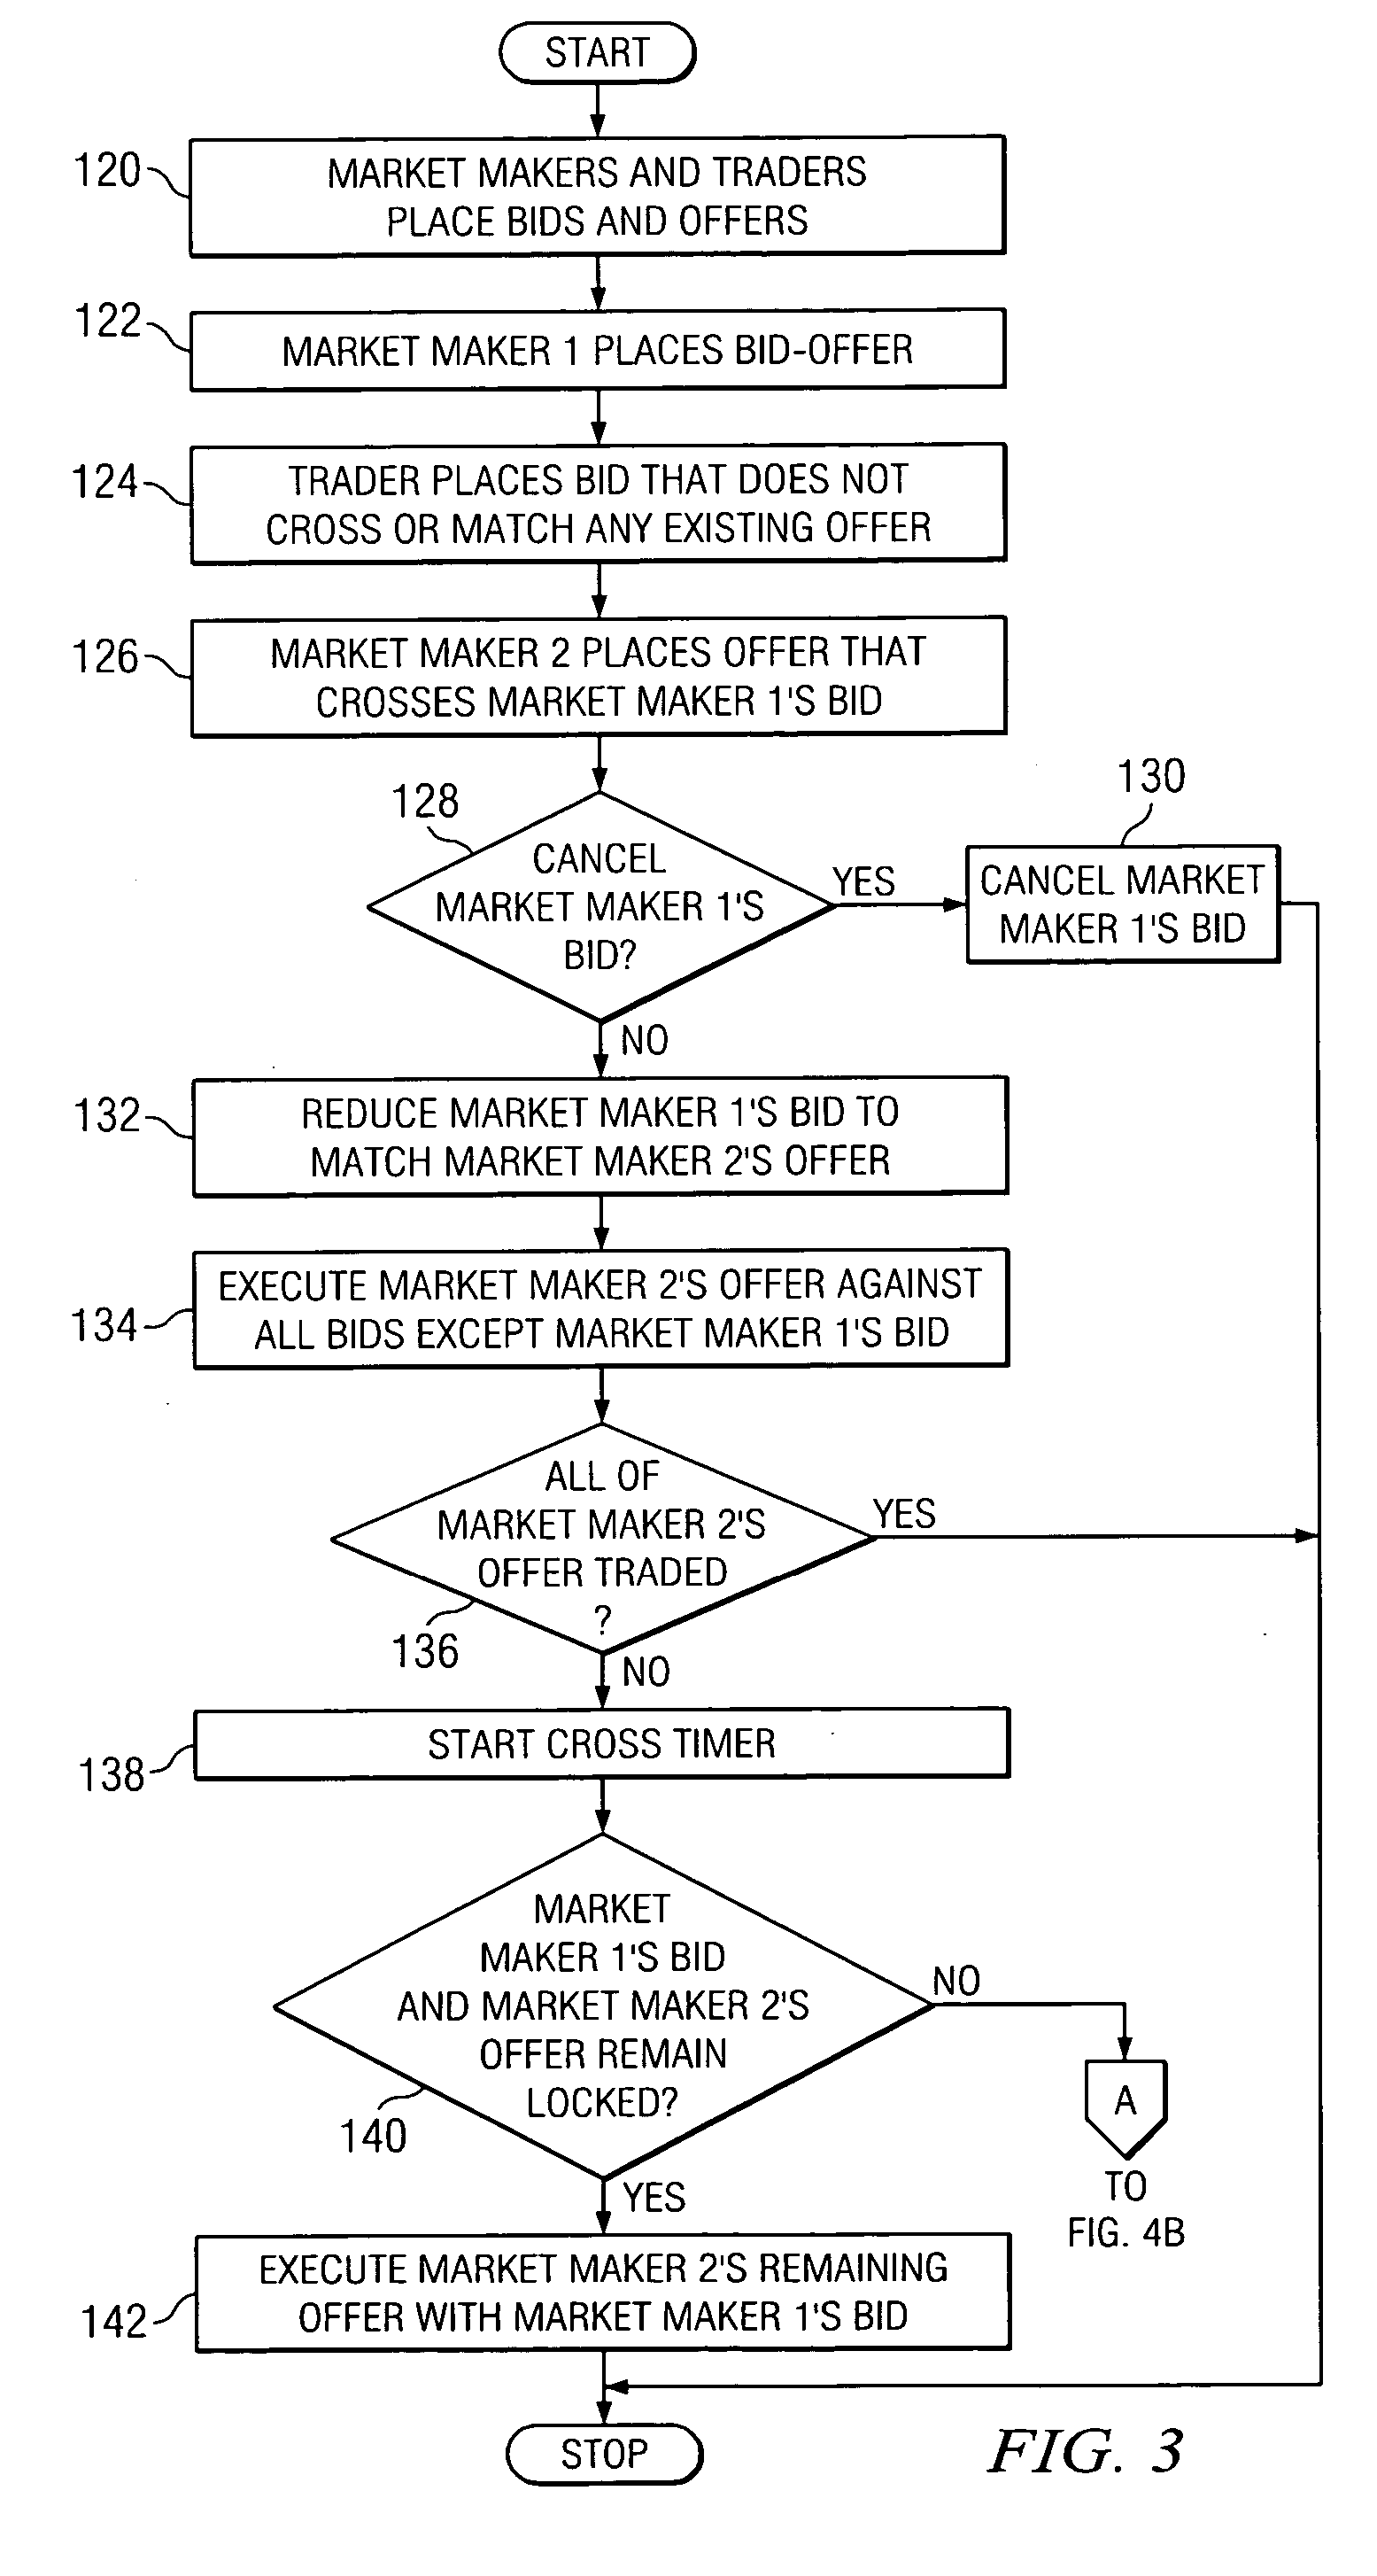 System and method for managing trading orders received from market makers